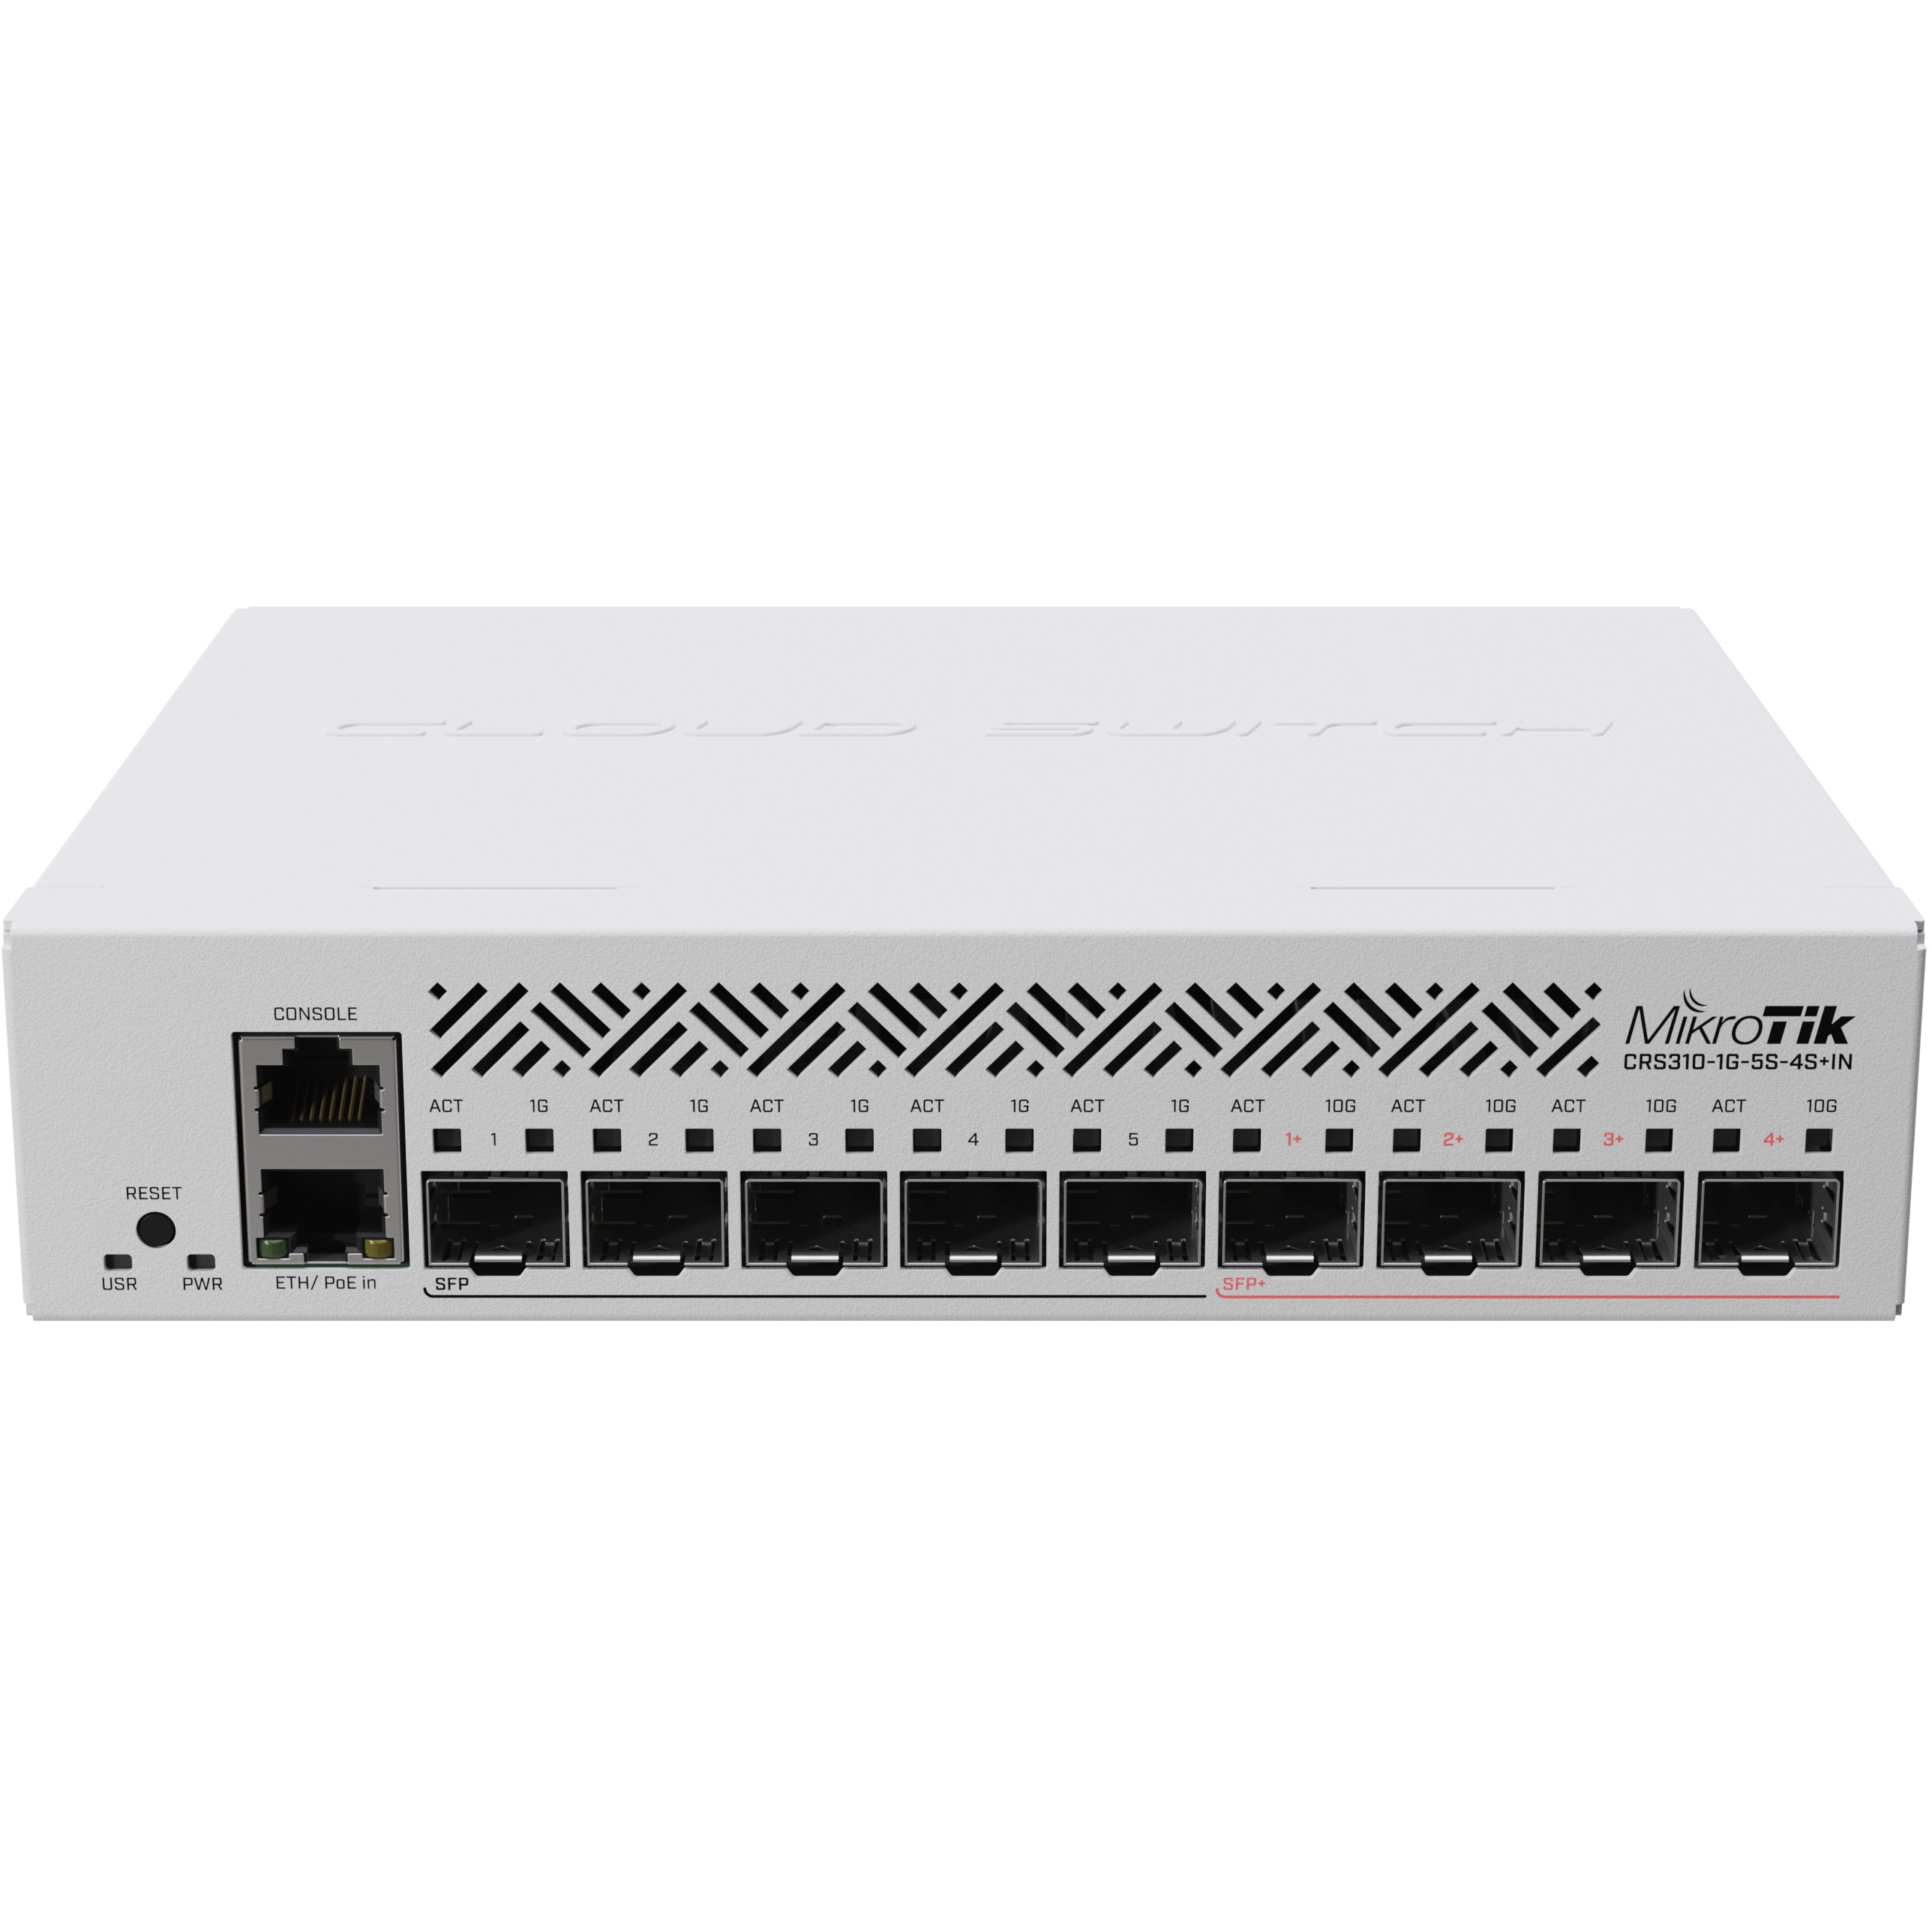 MIKROTIK Mikrotik CRS310-1G-5S-4S+IN 2 Router network Switching Netzwerk switch Hubs